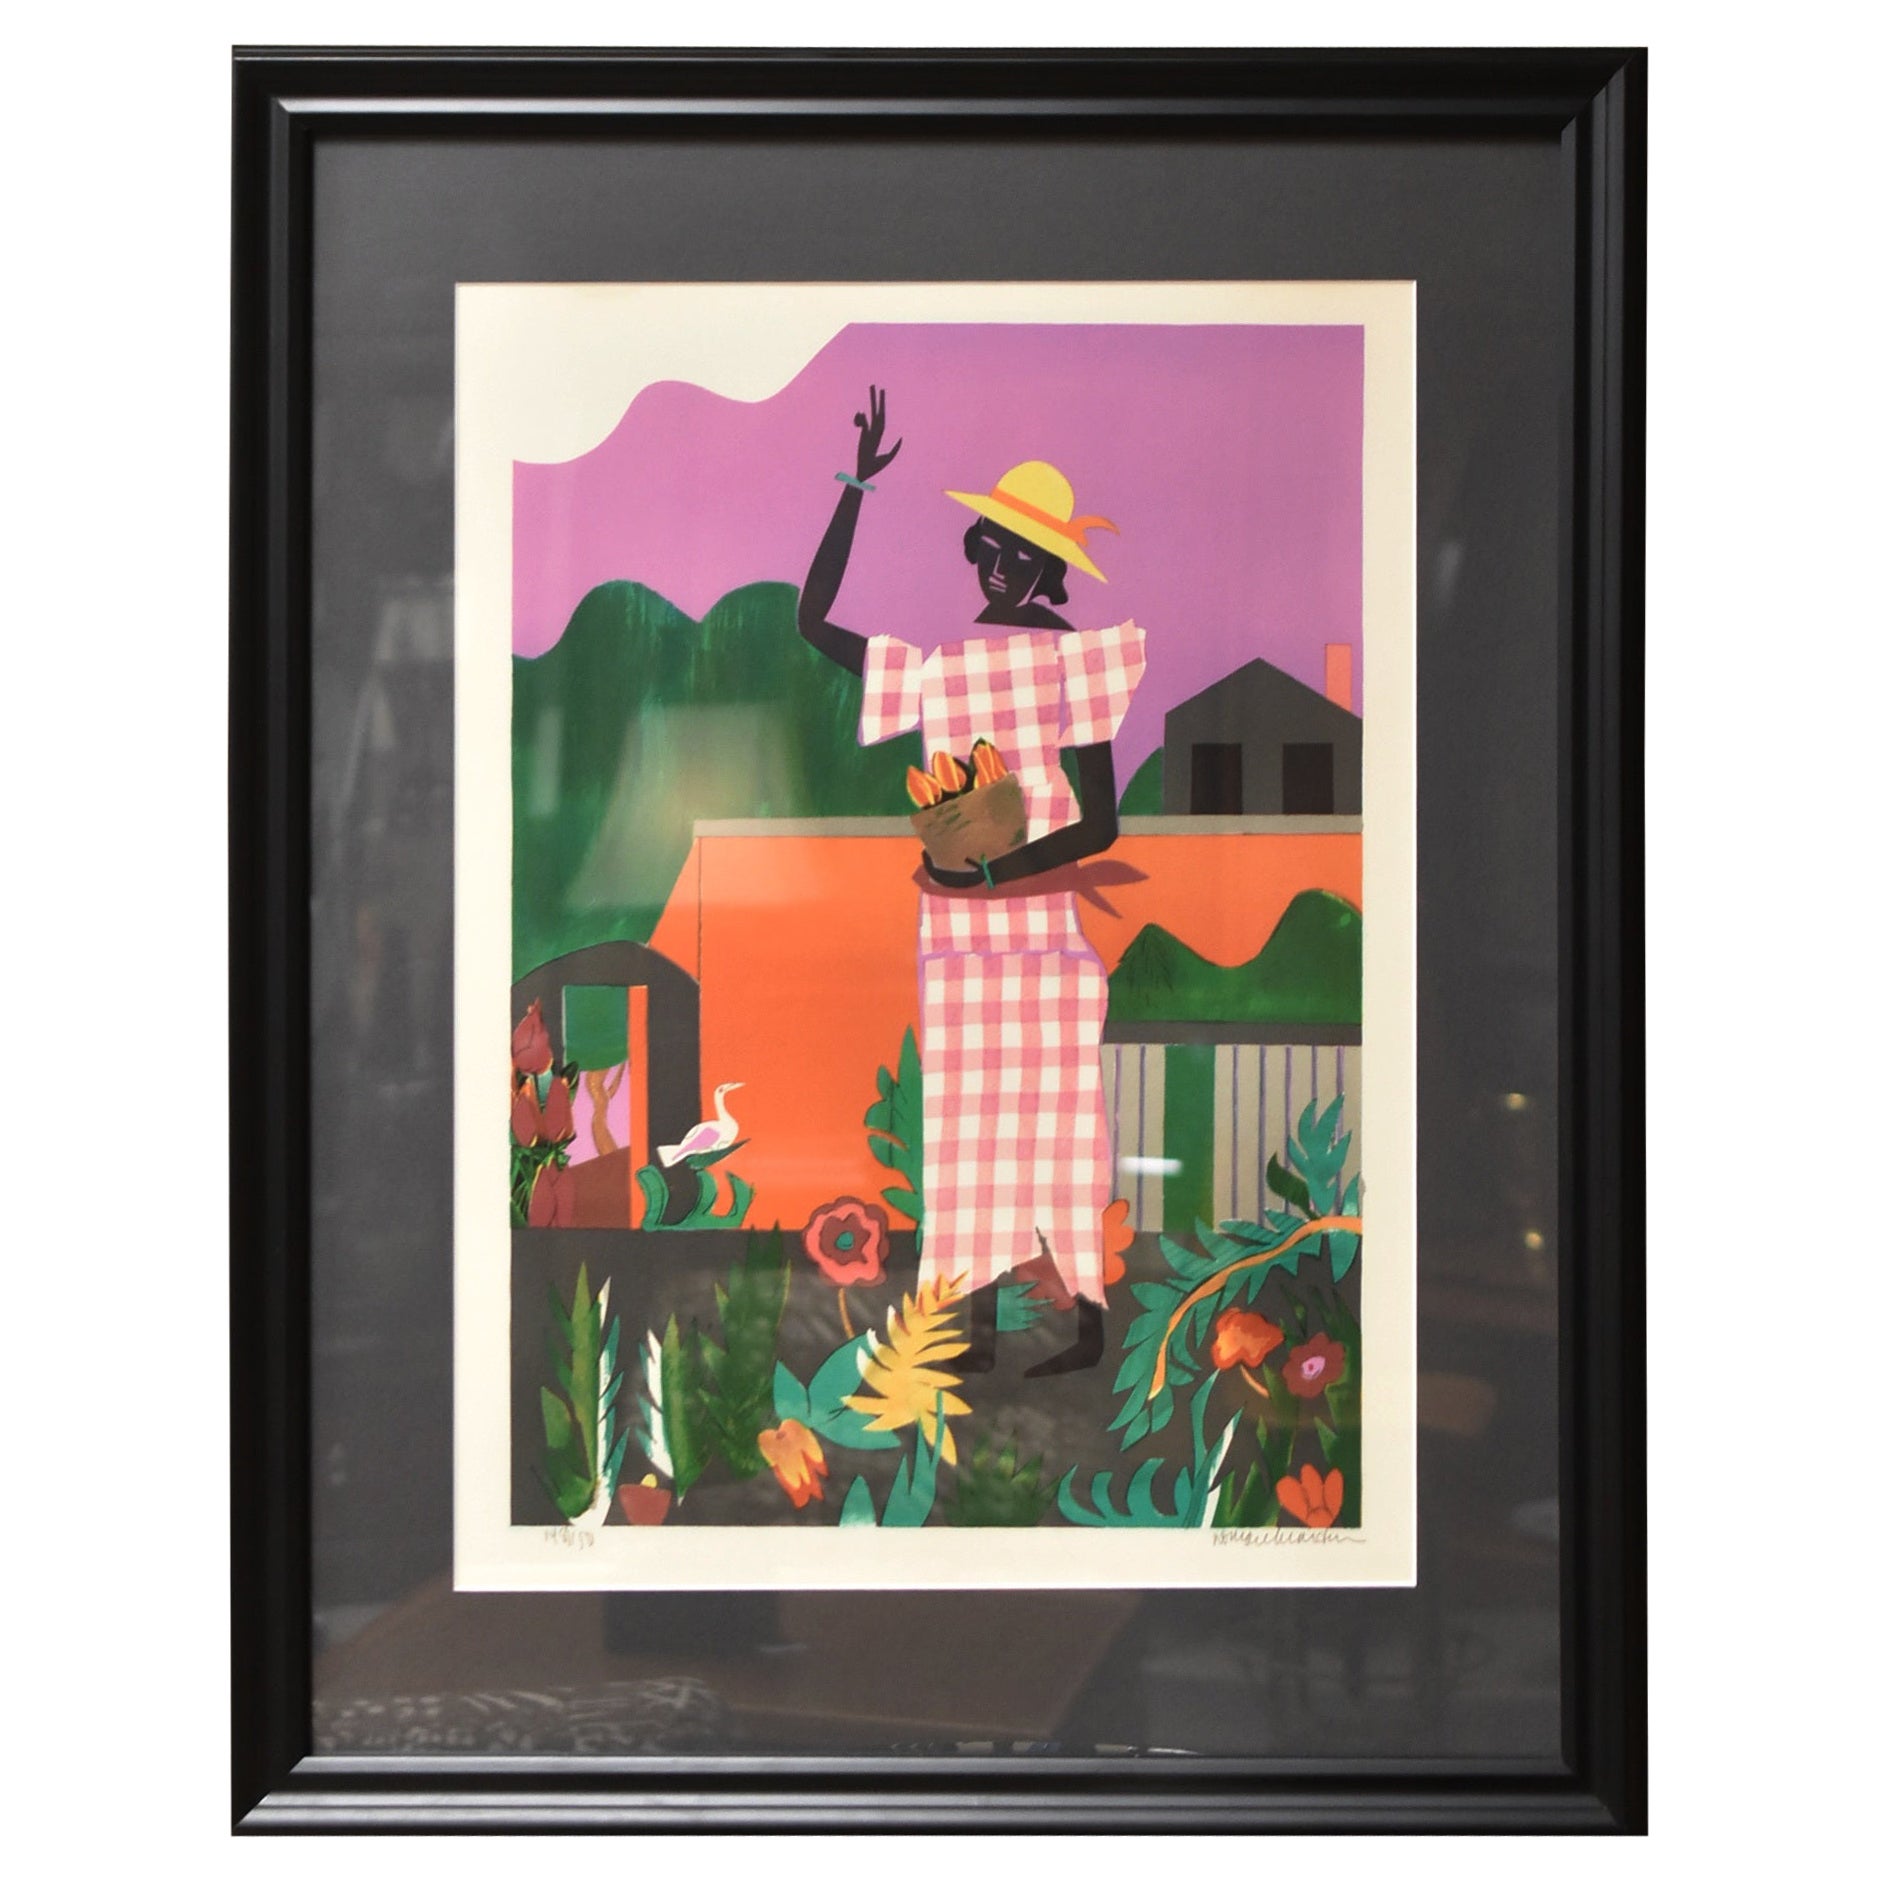 Romare Bearden Limited Edition Lithograph 148/150 "Girl In The Garden"